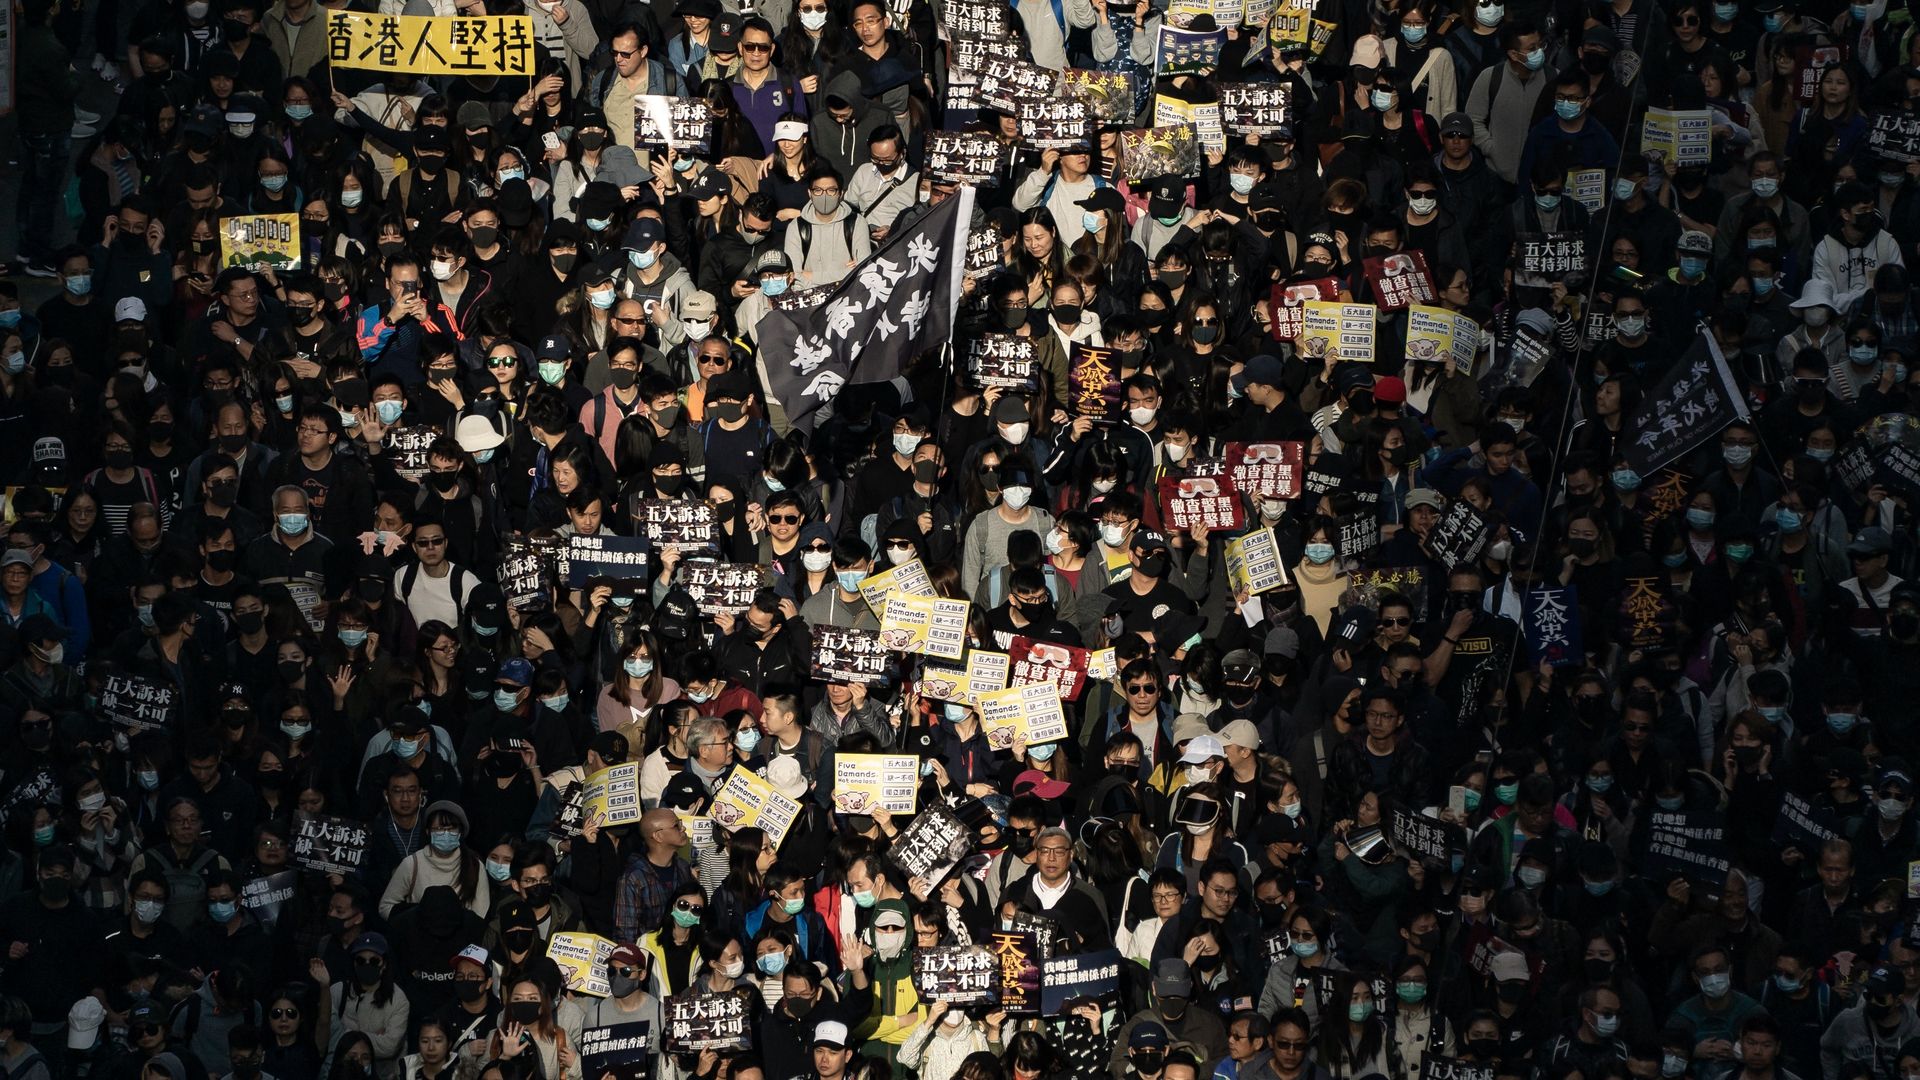 Pro-democracy protesters march in Hong Kong